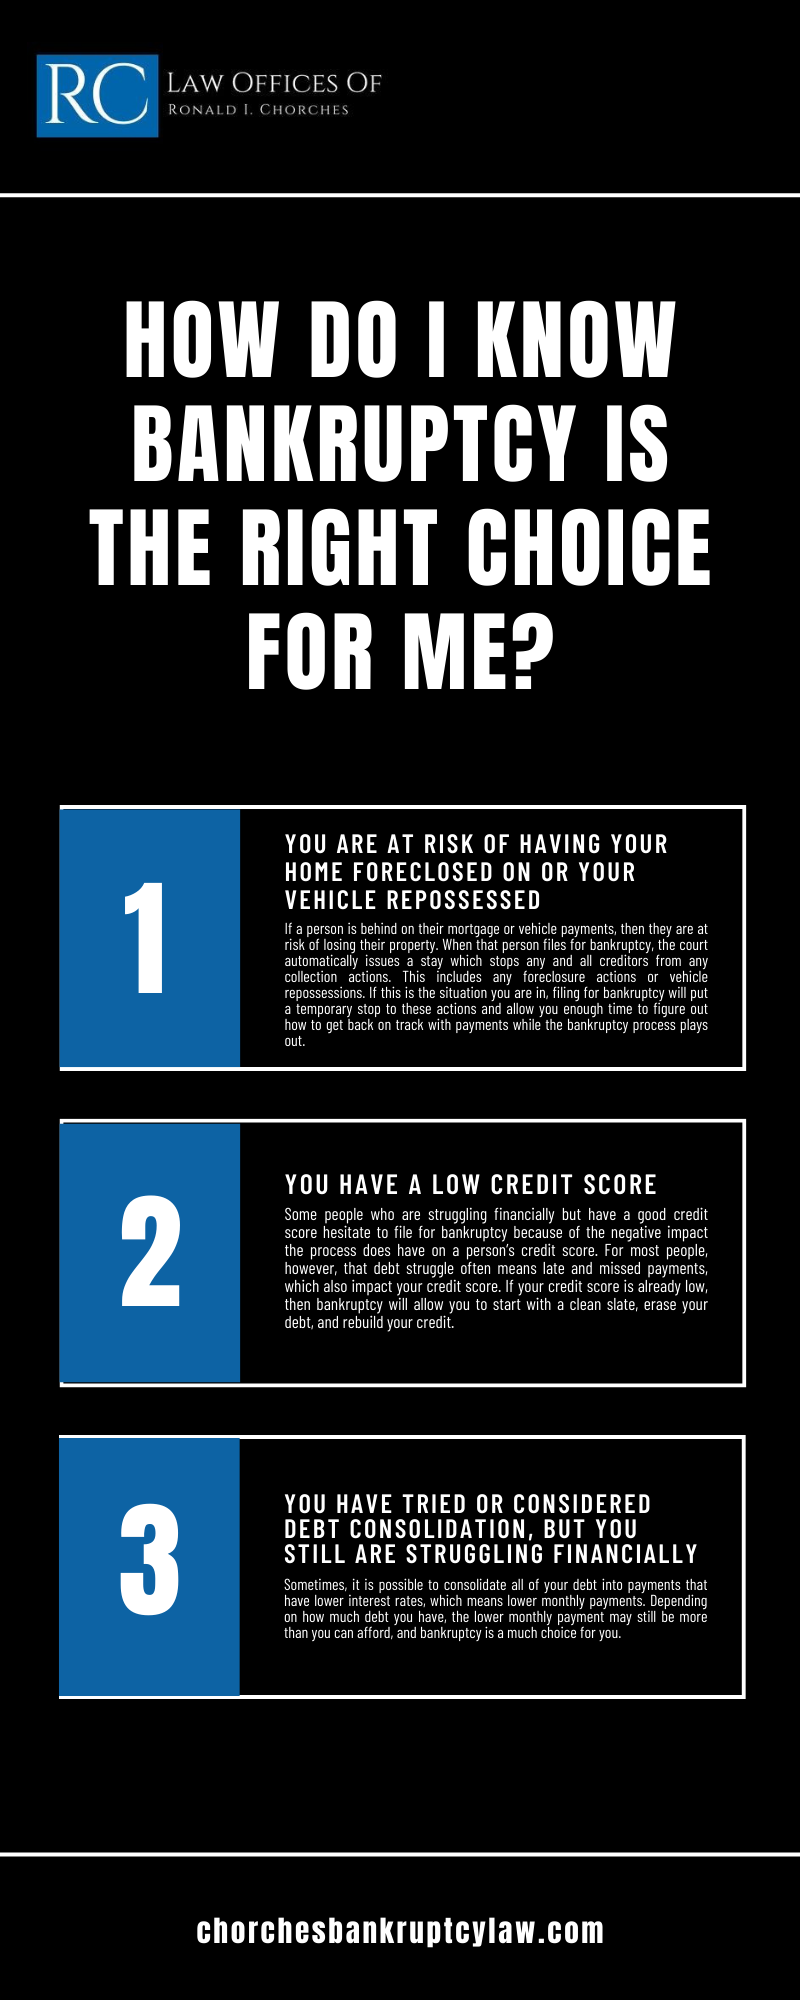 HOW DO I KNOW BANKRUPTCY IS THE RIGHT CHOICE FOR ME INFOGRAPHIC